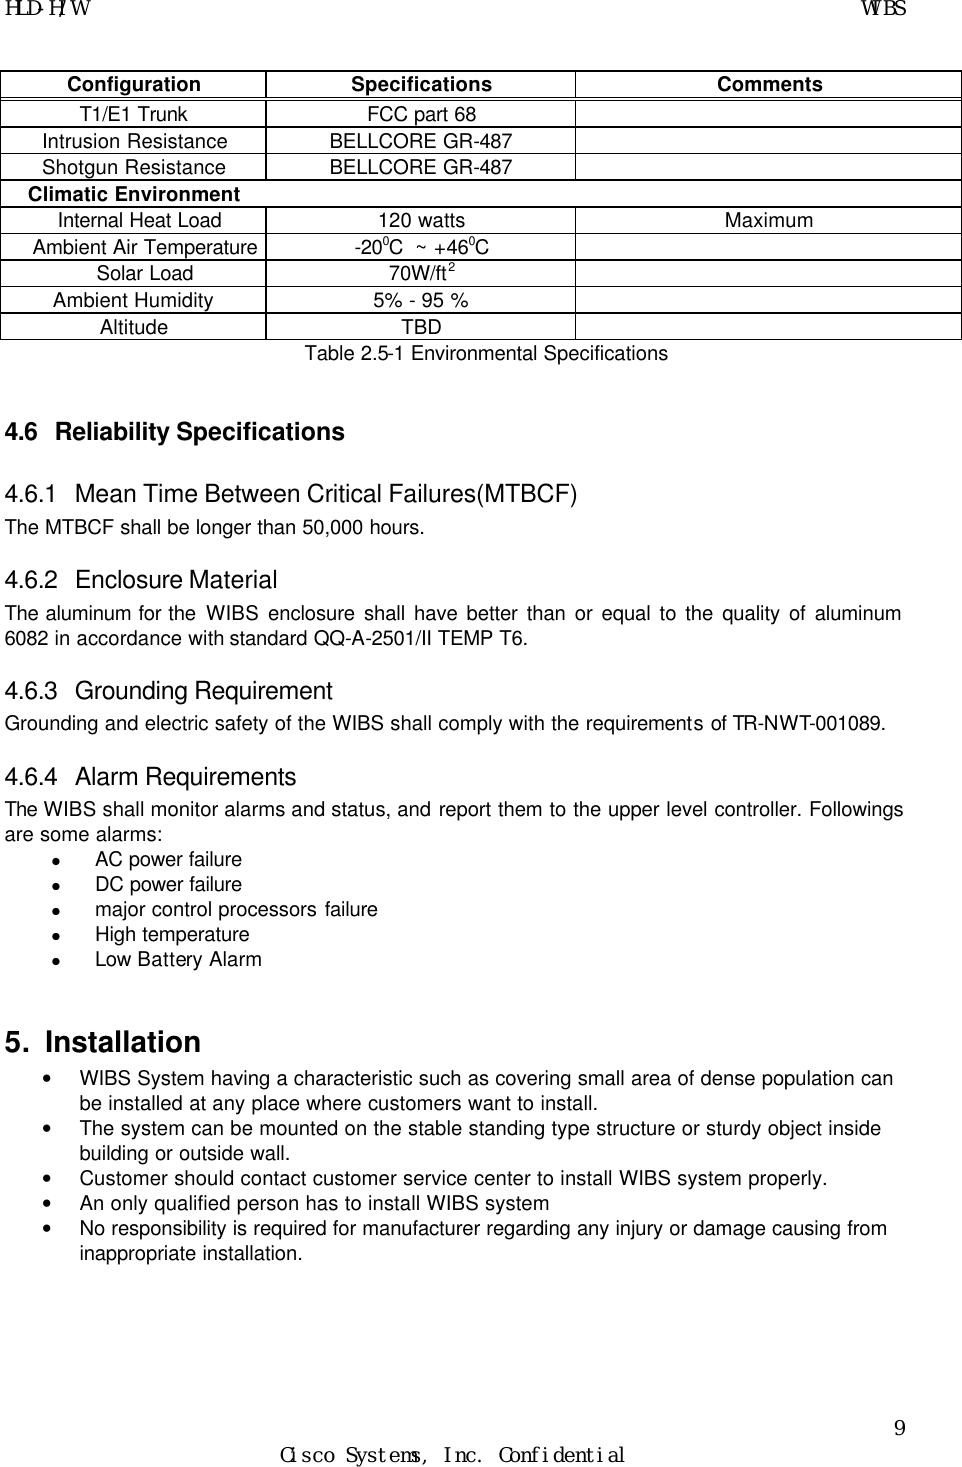 HLD-H/W    WIBS 9 Cisco Systems, Inc. Confidential  Configuration Specifications Comments T1/E1 Trunk FCC part 68   Intrusion Resistance BELLCORE GR-487   Shotgun Resistance BELLCORE GR-487   Climatic Environment       Internal Heat Load 120 watts Maximum Ambient Air Temperature -200C  ~ +460C    Solar Load 70W/ft2   Ambient Humidity 5% - 95 %   Altitude TBD   Table 2.5-1 Environmental Specifications   4.6 Reliability Specifications 4.6.1 Mean Time Between Critical Failures(MTBCF) The MTBCF shall be longer than 50,000 hours. 4.6.2 Enclosure Material     The aluminum for the WIBS enclosure shall have better than or equal to the quality of aluminum 6082 in accordance with standard QQ-A-2501/II TEMP T6.  4.6.3 Grounding Requirement Grounding and electric safety of the WIBS shall comply with the requirements of TR-NWT-001089. 4.6.4 Alarm Requirements The WIBS shall monitor alarms and status, and report them to the upper level controller. Followings are some alarms: l AC power failure l DC power failure l major control processors failure l High temperature l Low Battery Alarm  5. Installation • WIBS System having a characteristic such as covering small area of dense population can be installed at any place where customers want to install. • The system can be mounted on the stable standing type structure or sturdy object inside building or outside wall. • Customer should contact customer service center to install WIBS system properly. • An only qualified person has to install WIBS system • No responsibility is required for manufacturer regarding any injury or damage causing from inappropriate installation.     